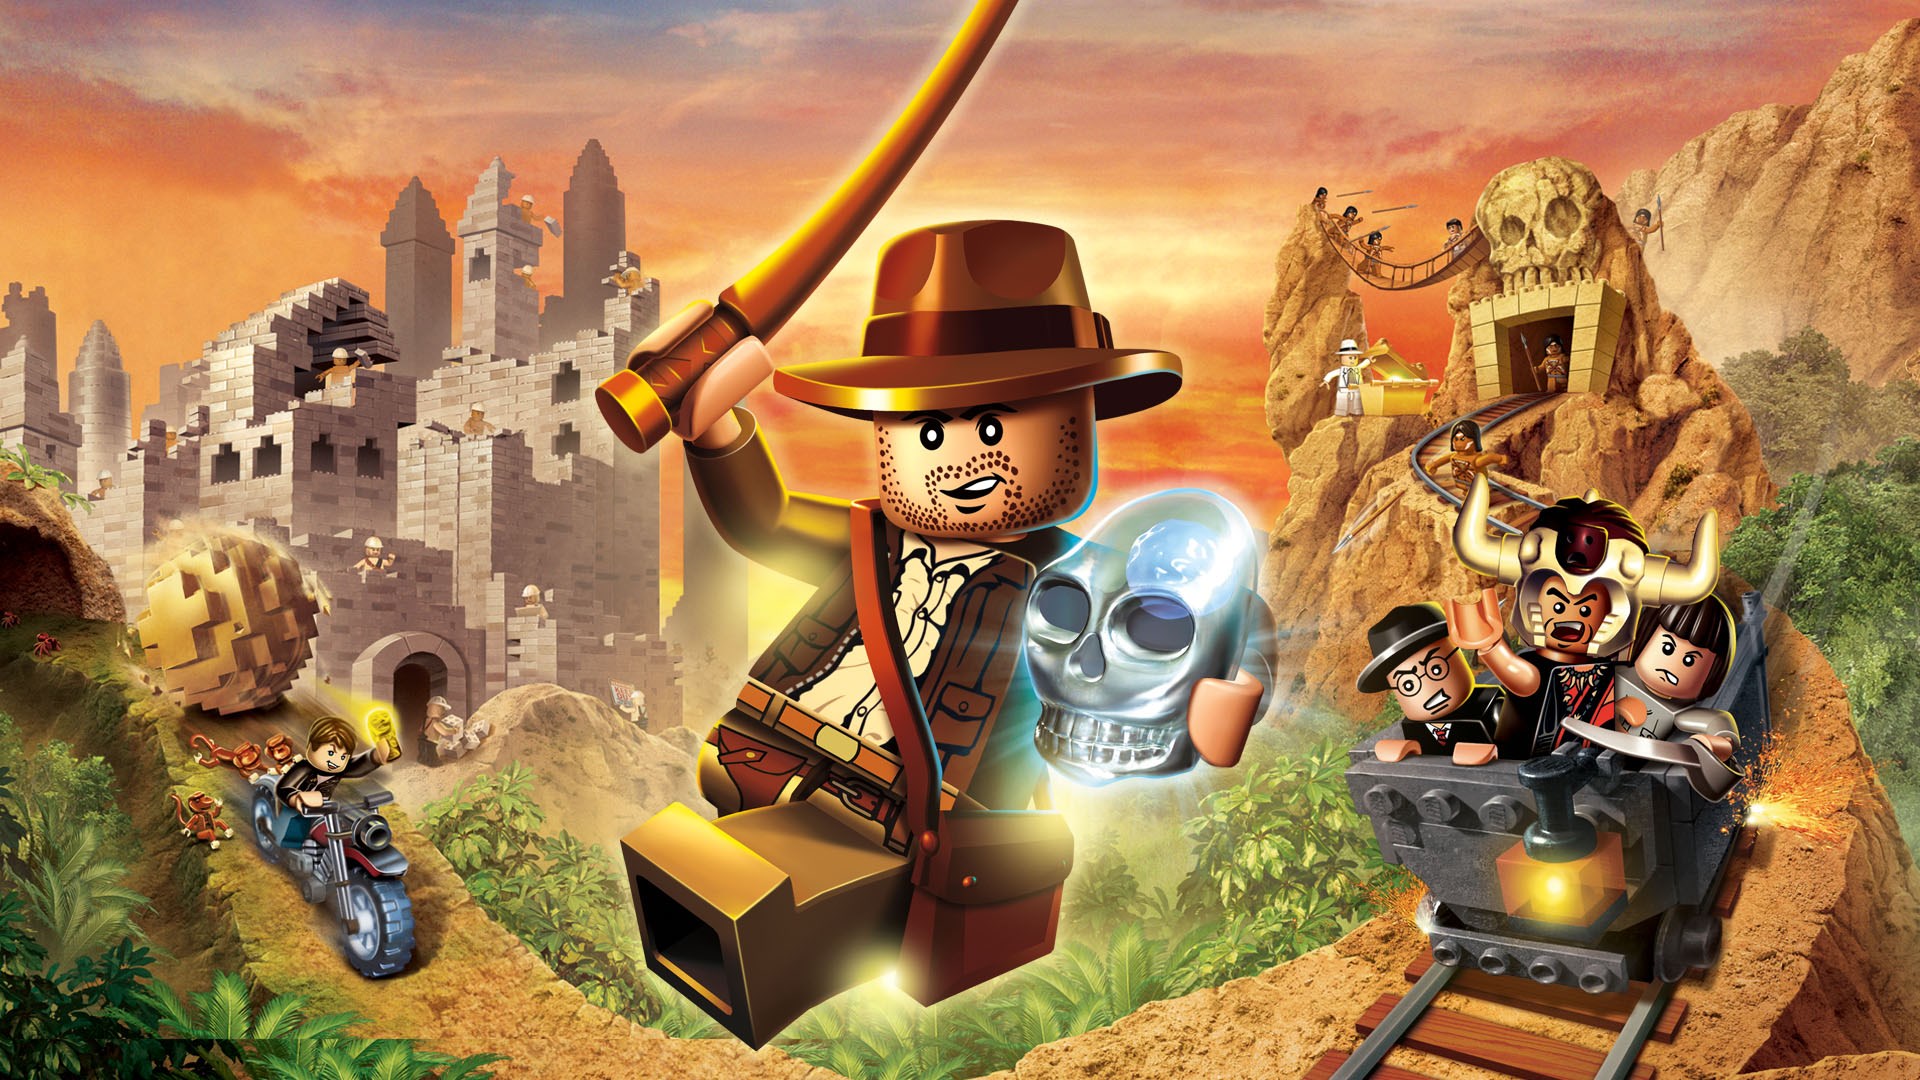 Does Lego Indiana Jones 2 Include The First Game